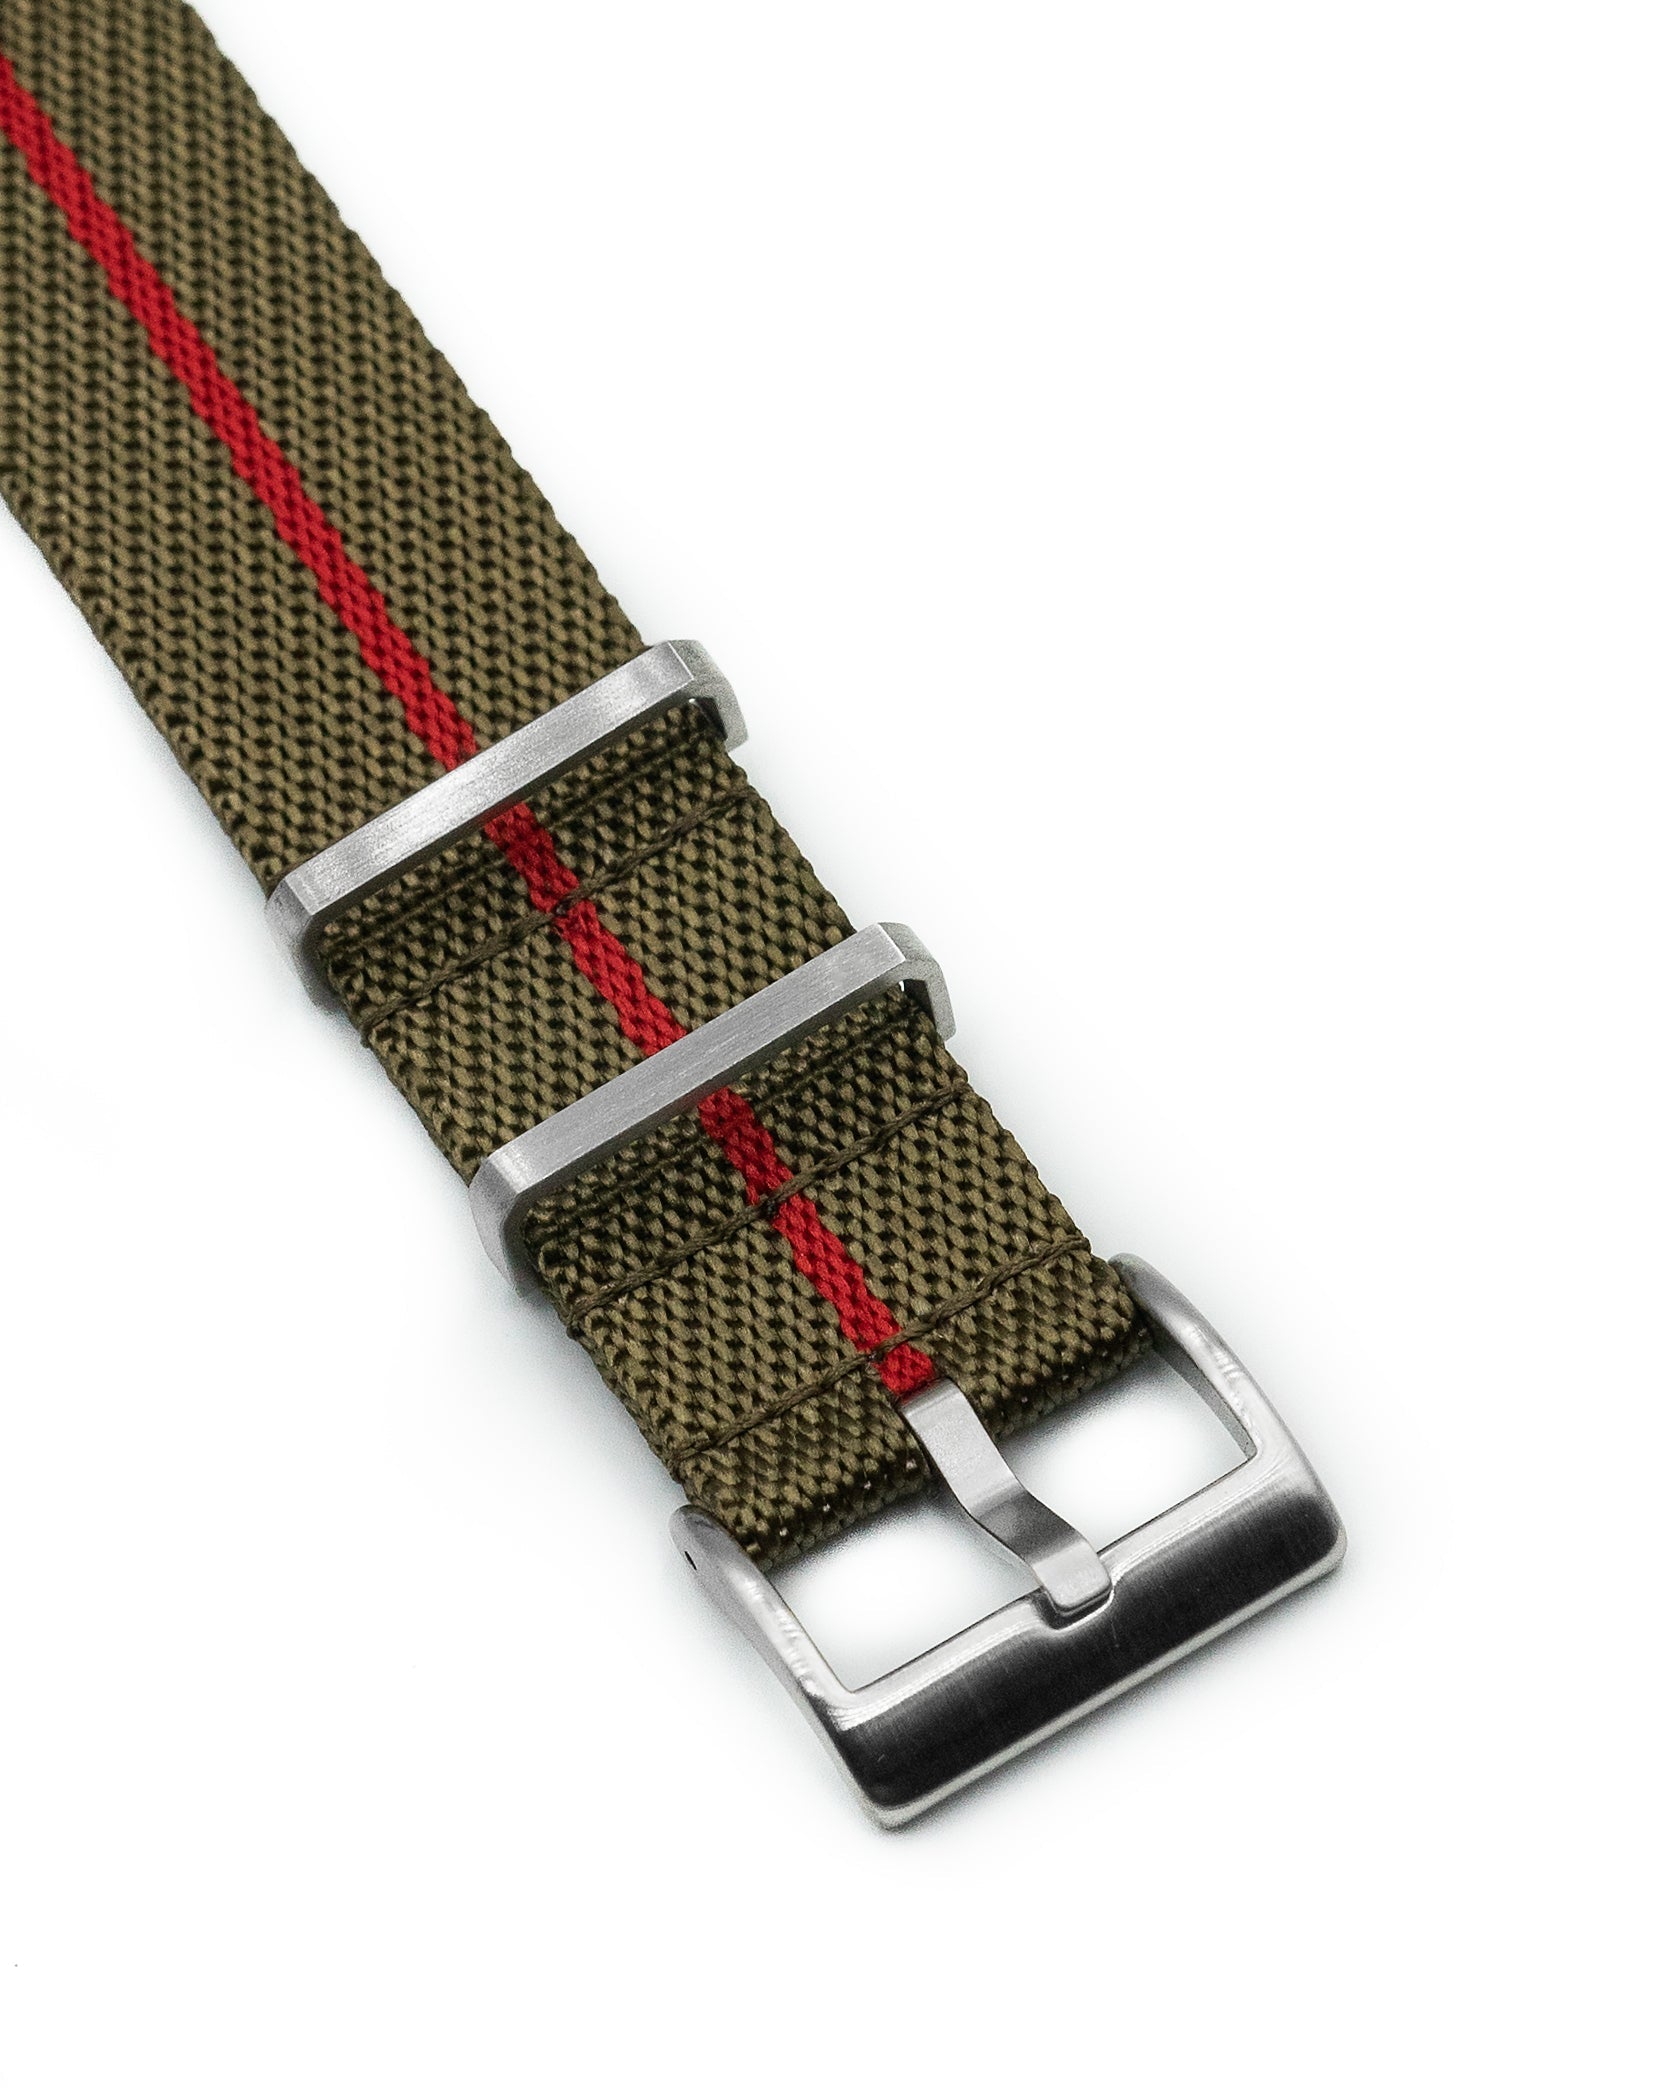 Nylon M II - Olive with red centerline